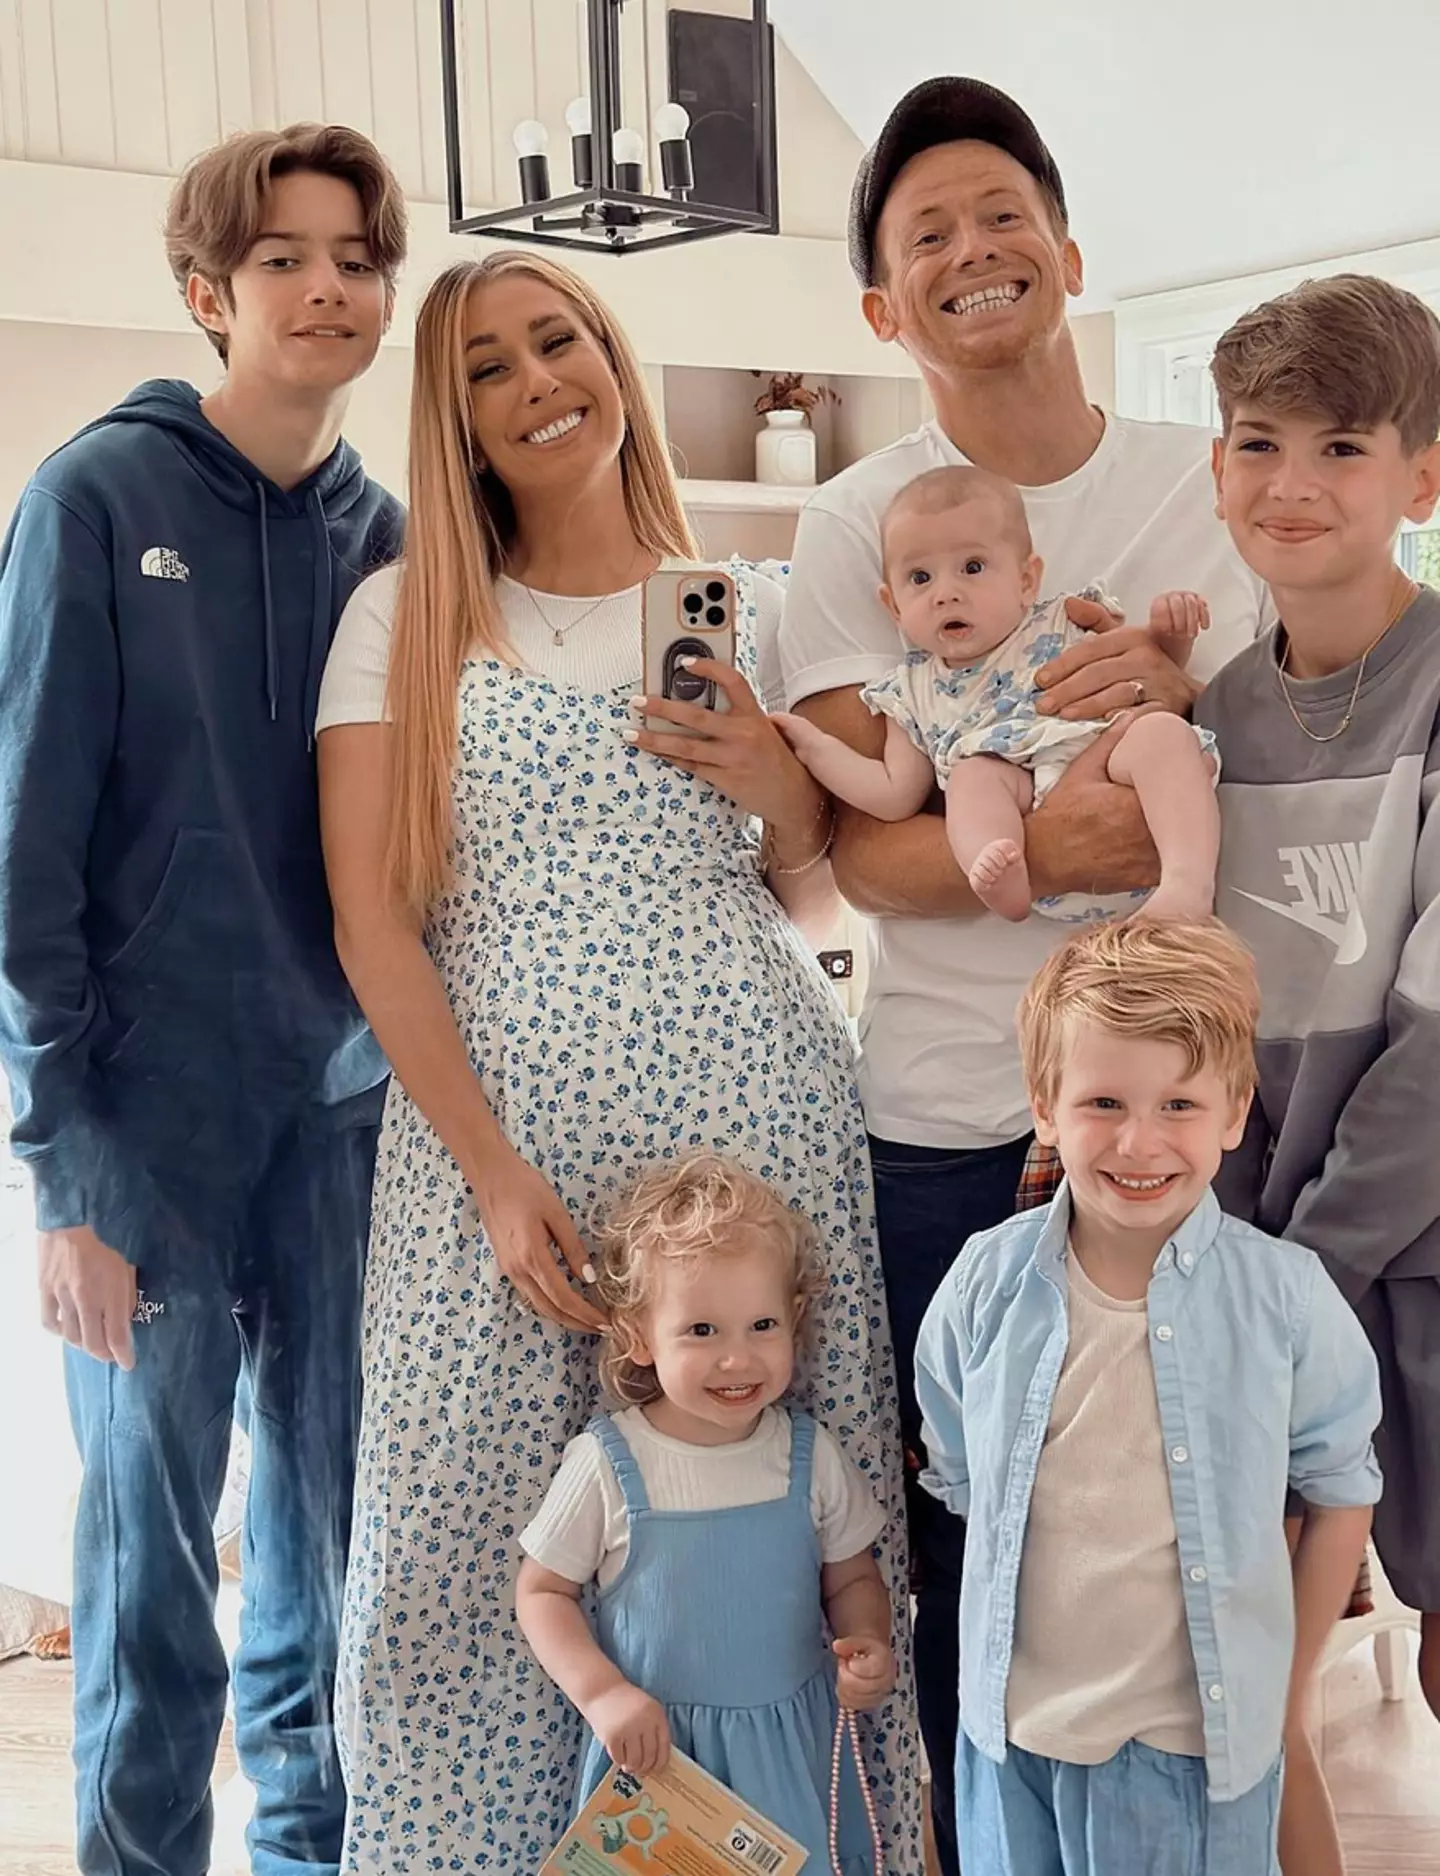 Stacey Solomon regularly shows off her home life.